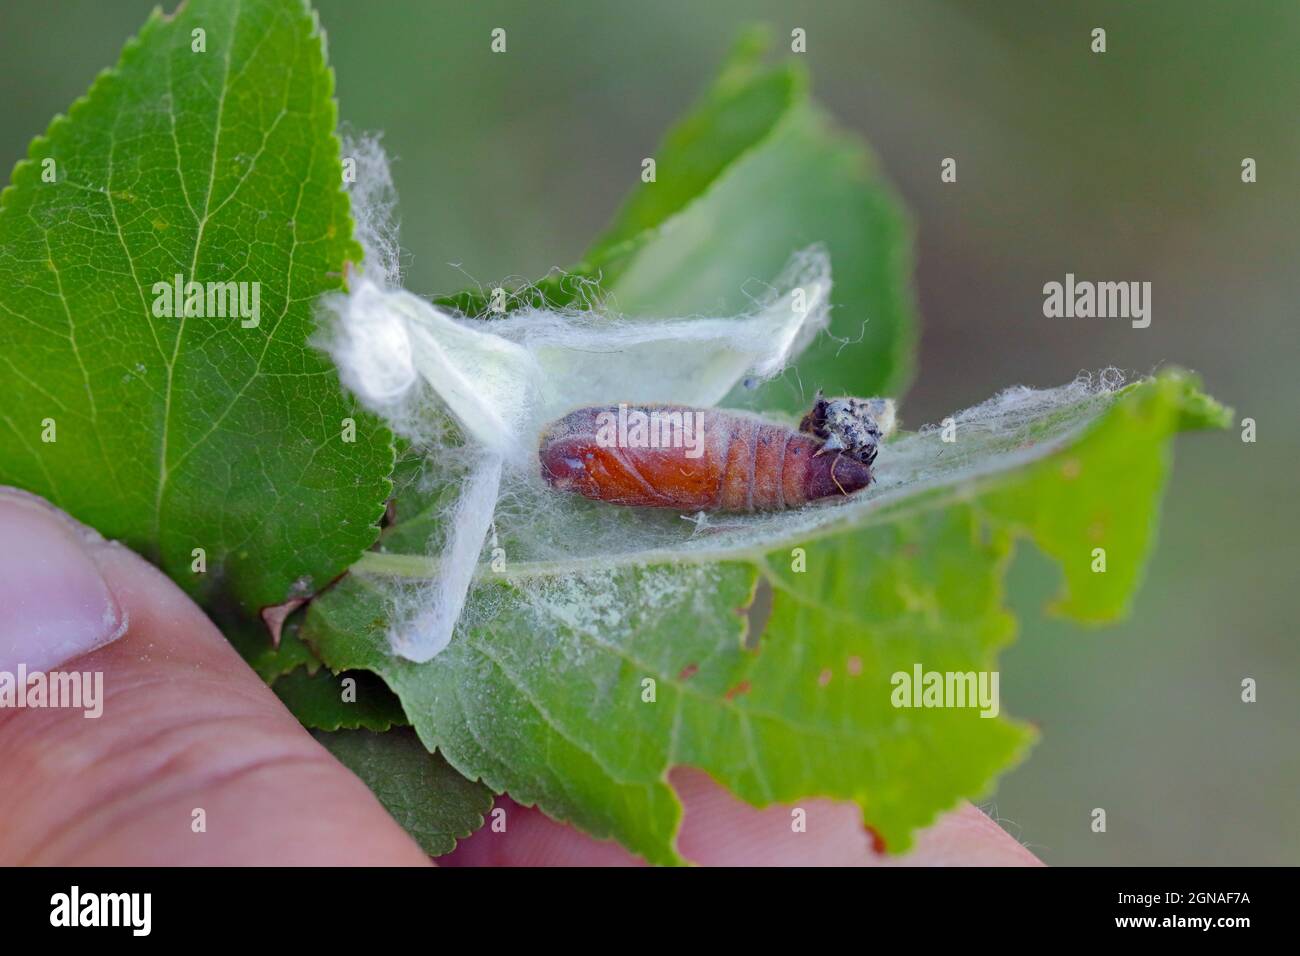 Pupa of the lackey moth (Malacosoma neustria). Caterpillars can cause significant damage to apple, plum and other orchards. Stock Photo